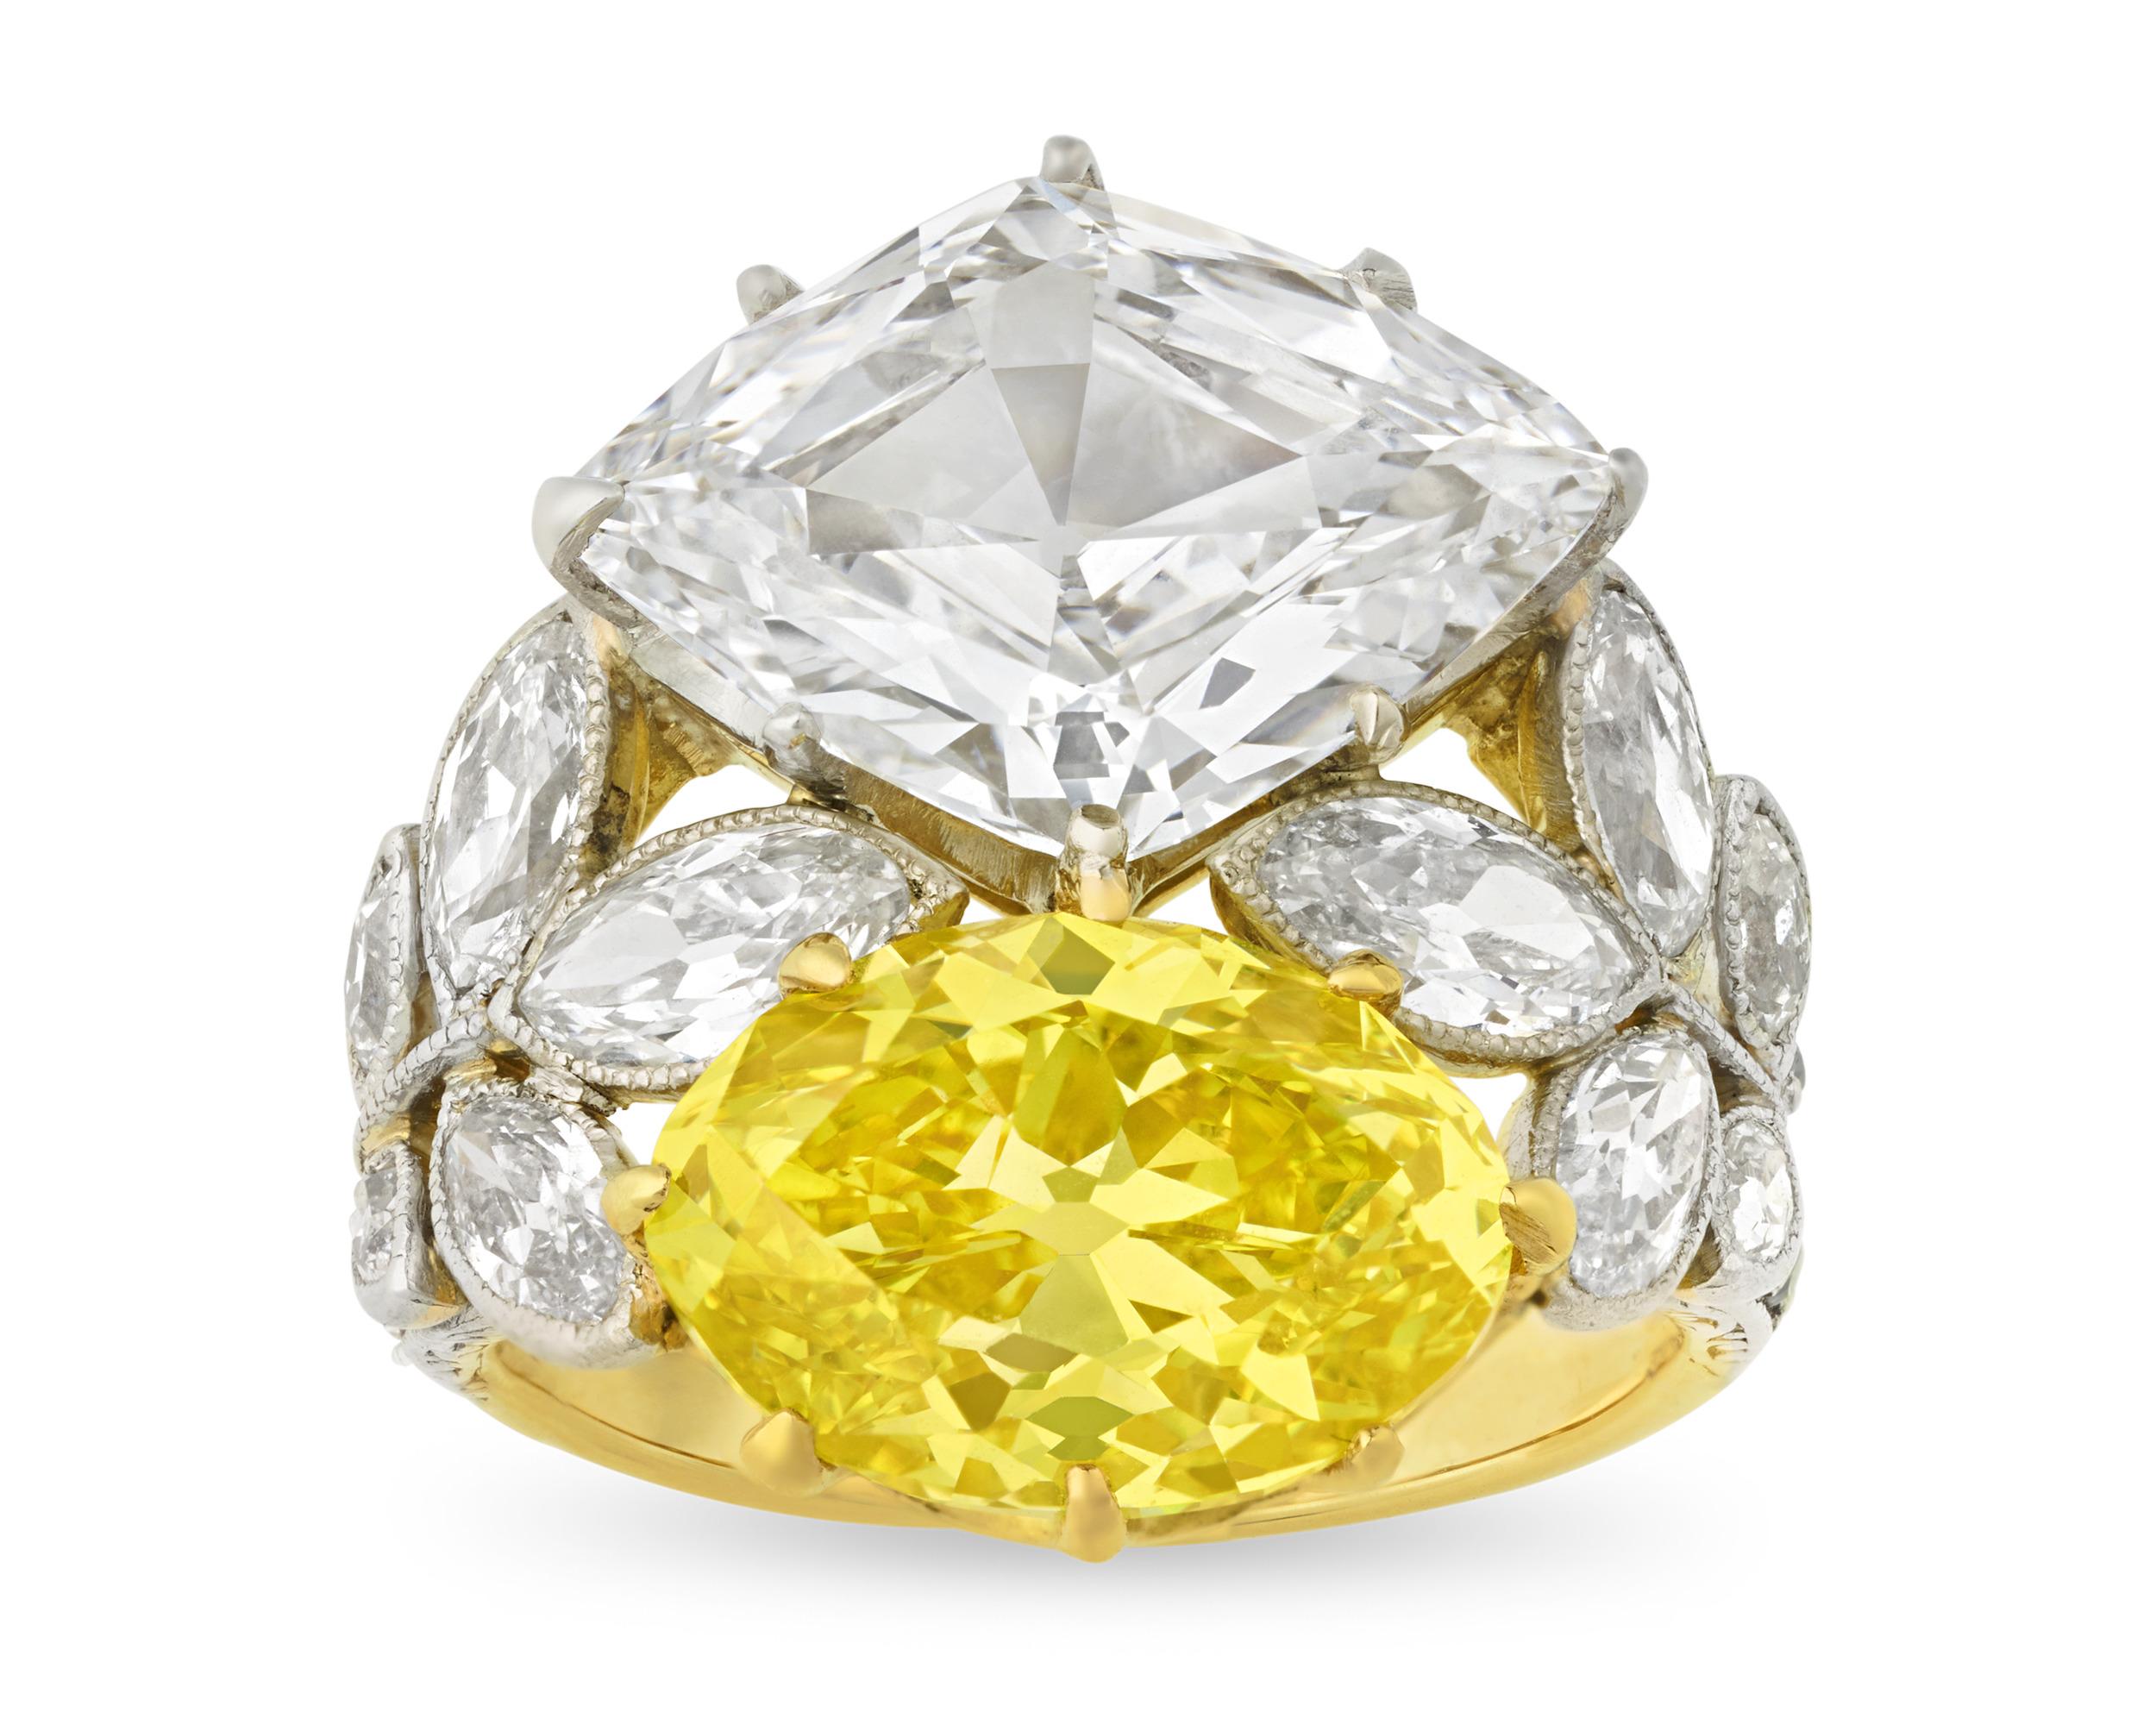 A breathtaking combination of two of the world’s finest diamonds and beautiful Belle Époque artistry, this ring displays both a stunning vivid yellow diamond and an extraordinary Golconda-type white diamond. Finding diamonds of this quality set into